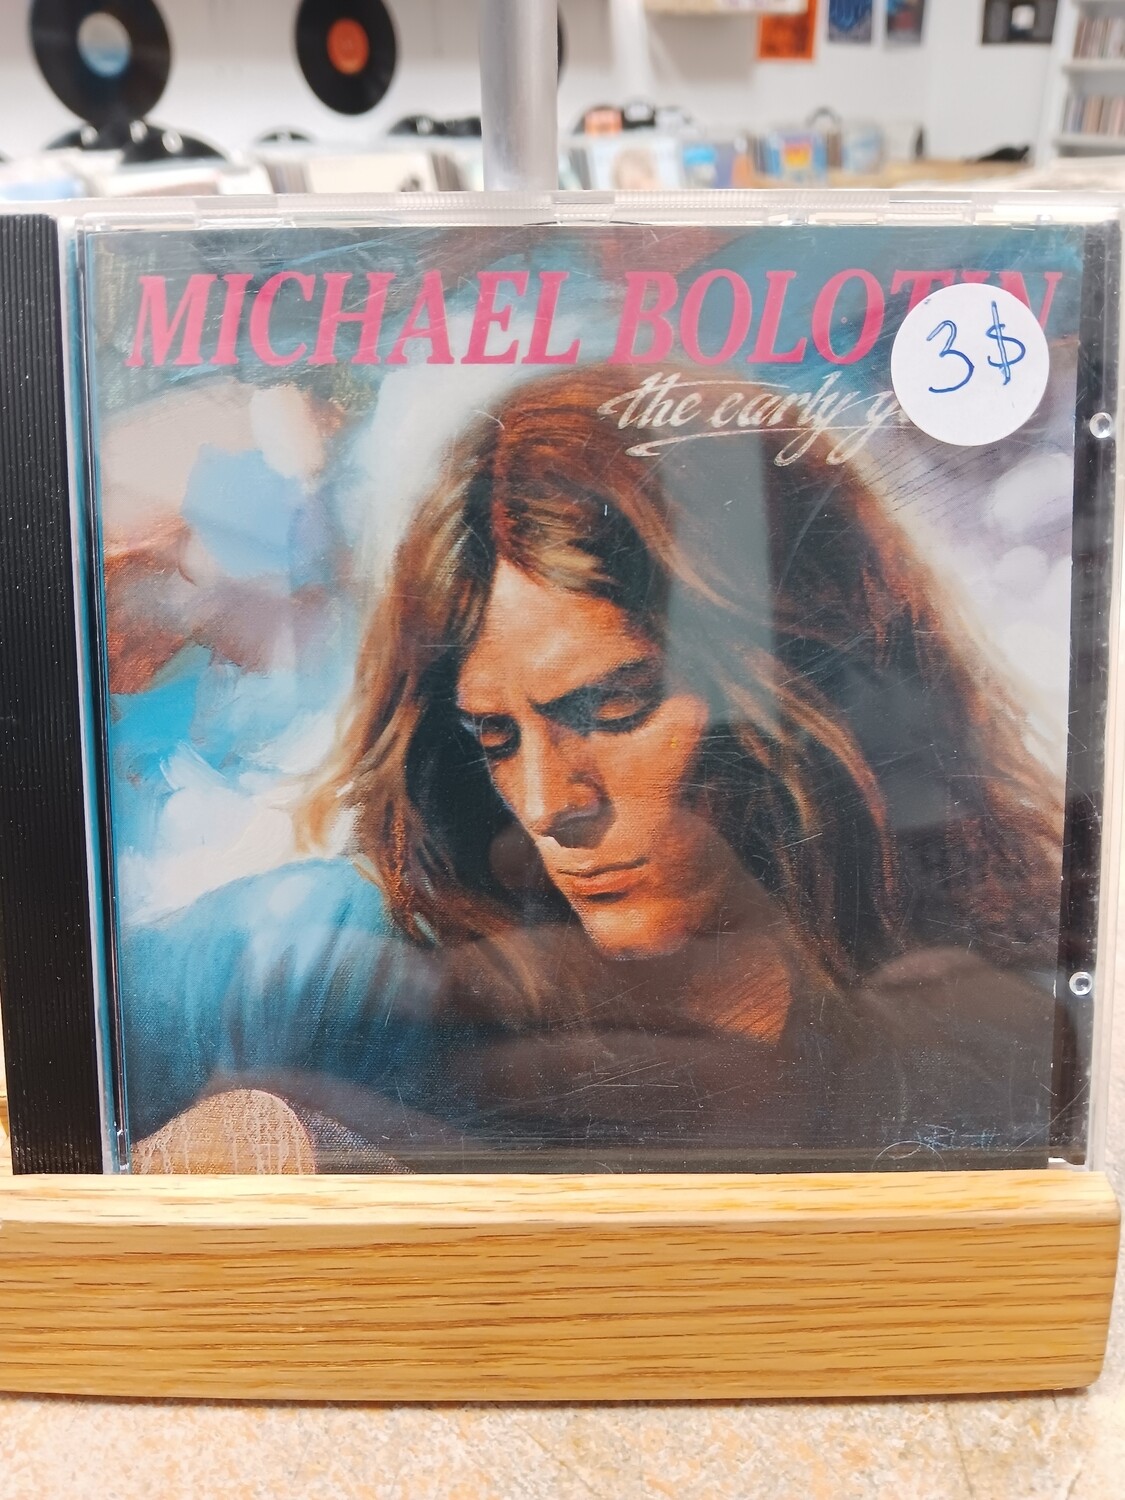 Michael Bolotin - The early years (CD)